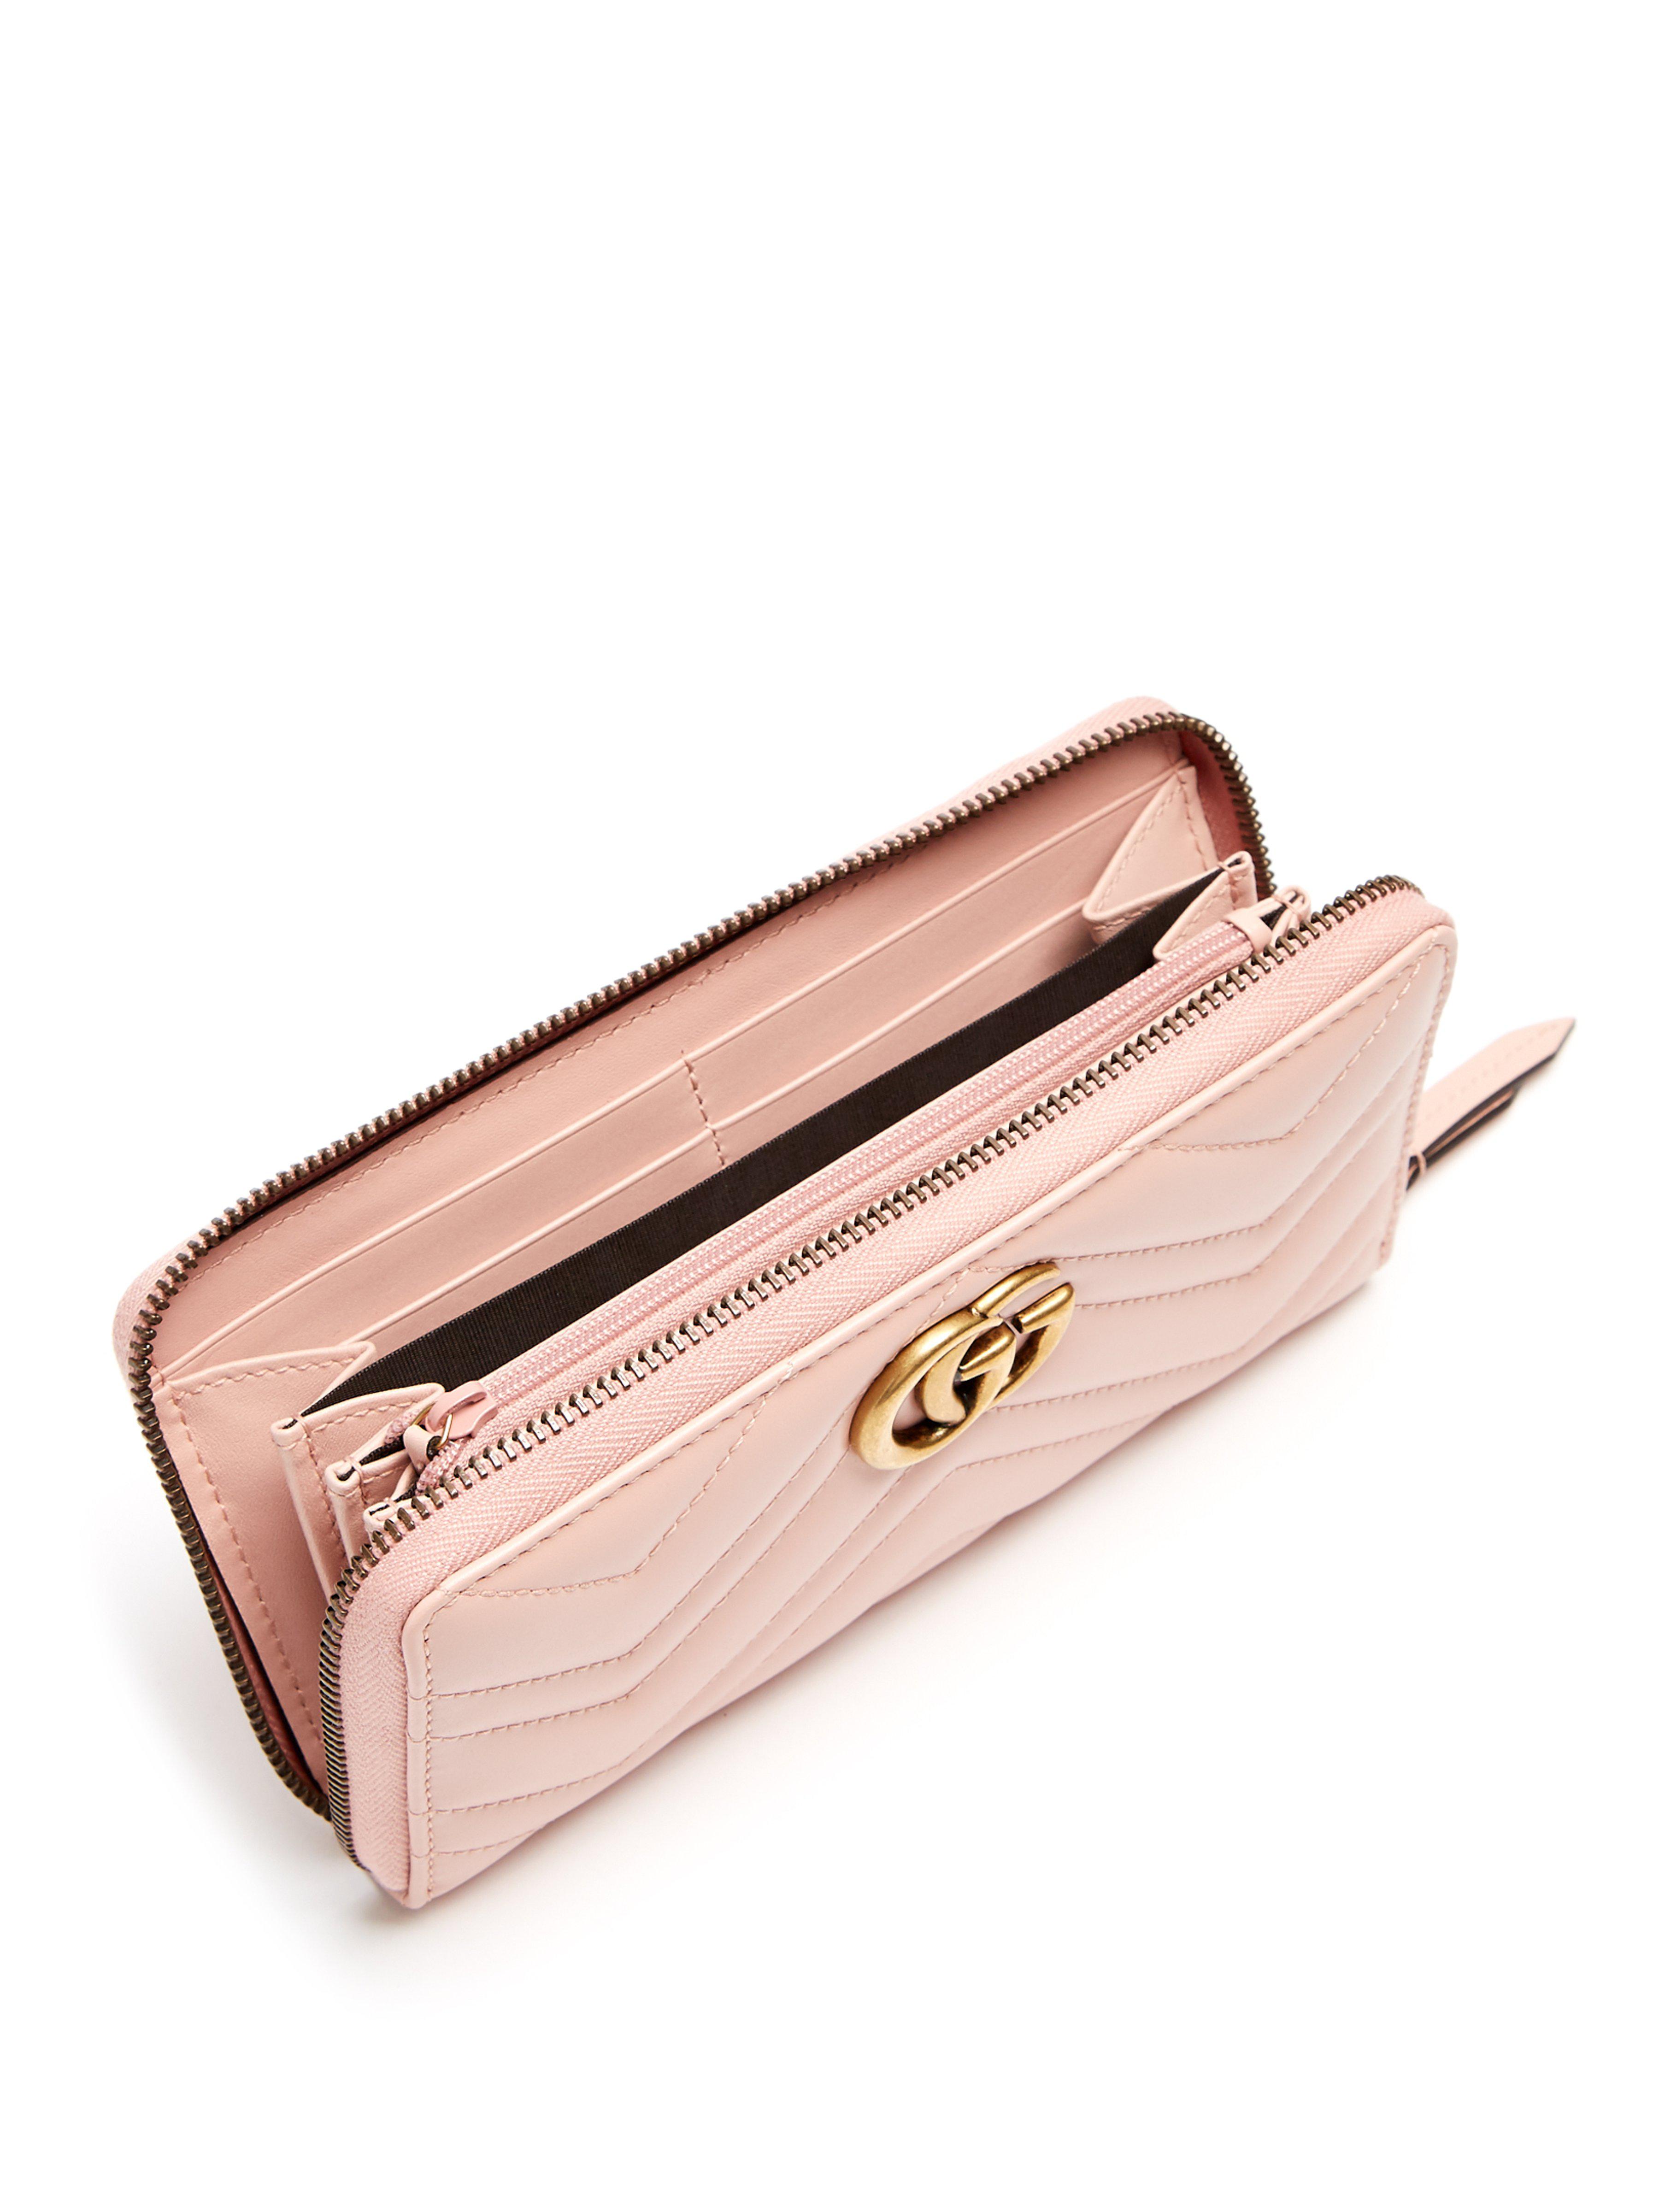 Gucci GG Marmont Quilted-leather Wallet in Pink - Lyst